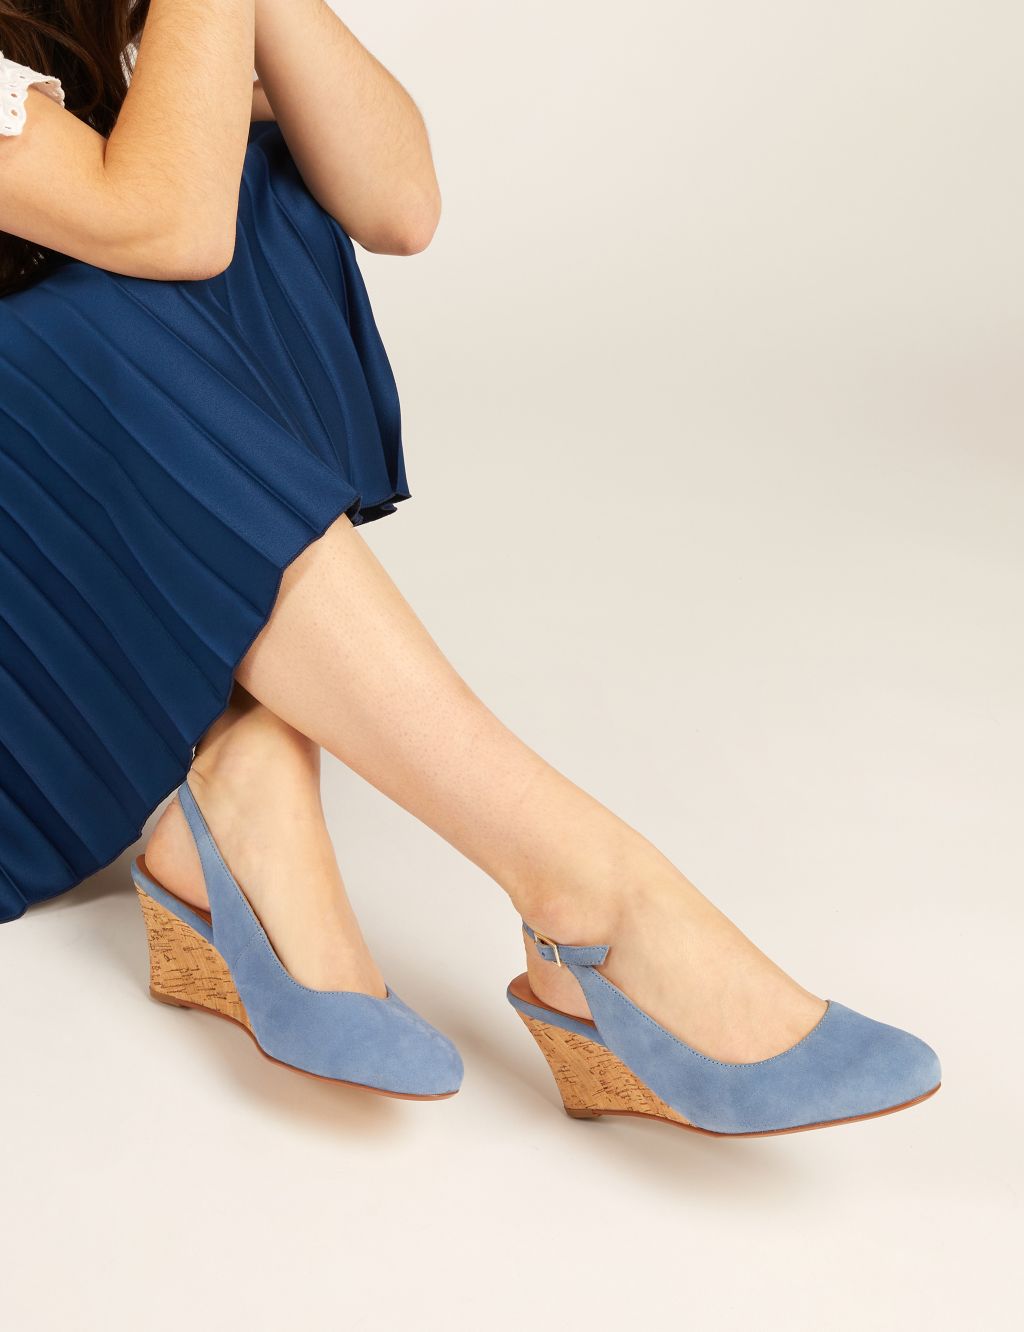 Suede Wedge Slingback Shoes